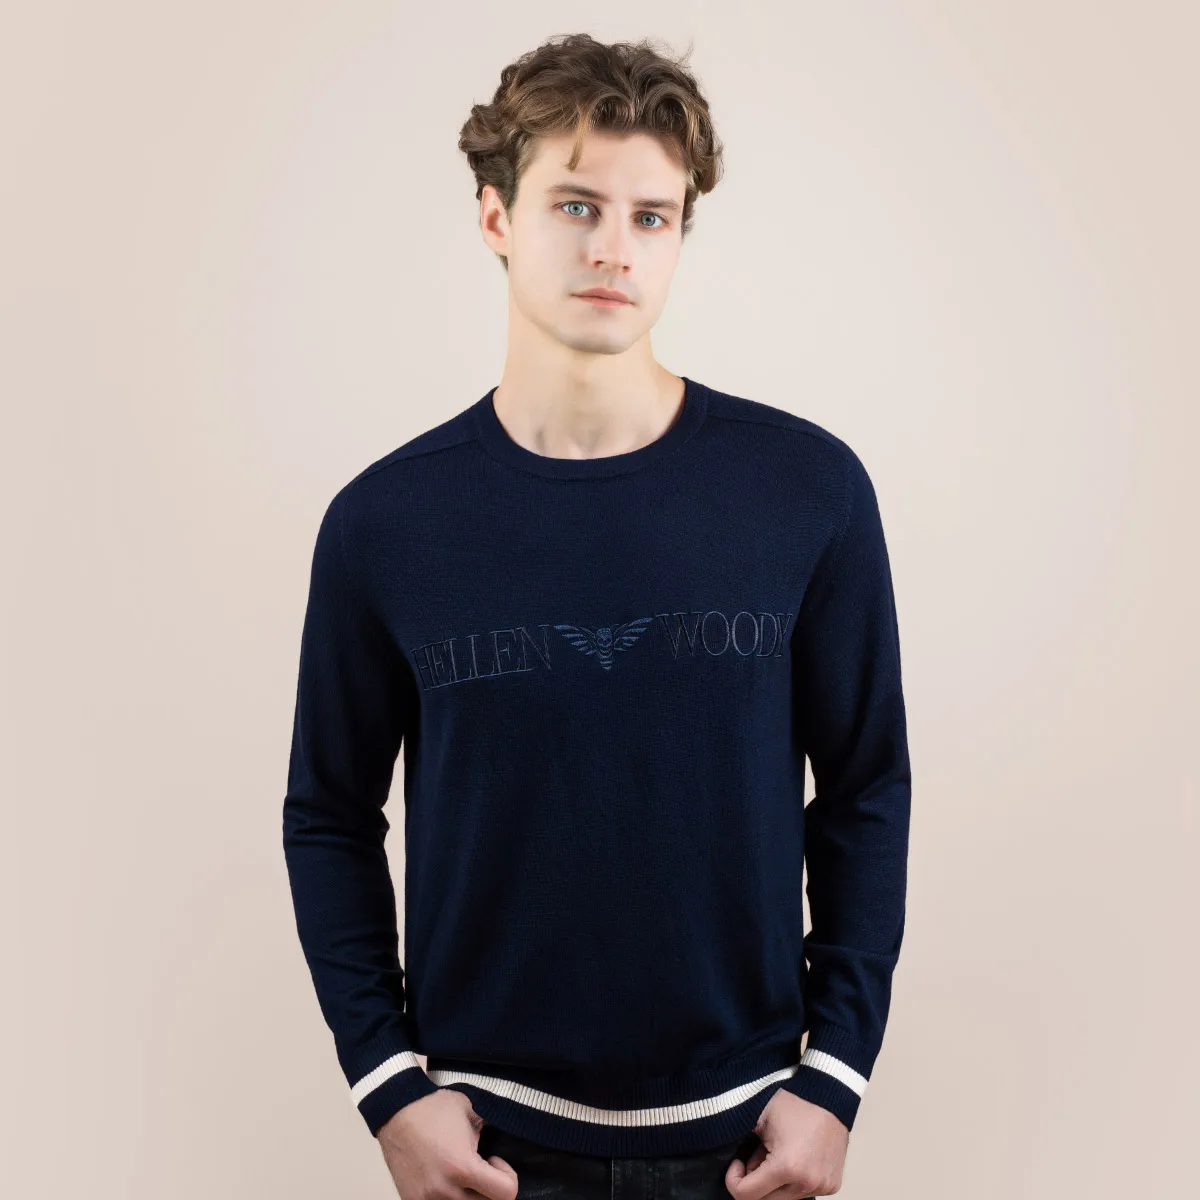 HELLEN&WOODY Autumn Luxury Black Pure Wool Sweater Casual Regular Round Neck Pullover Knitted Long Sleeve Sweater